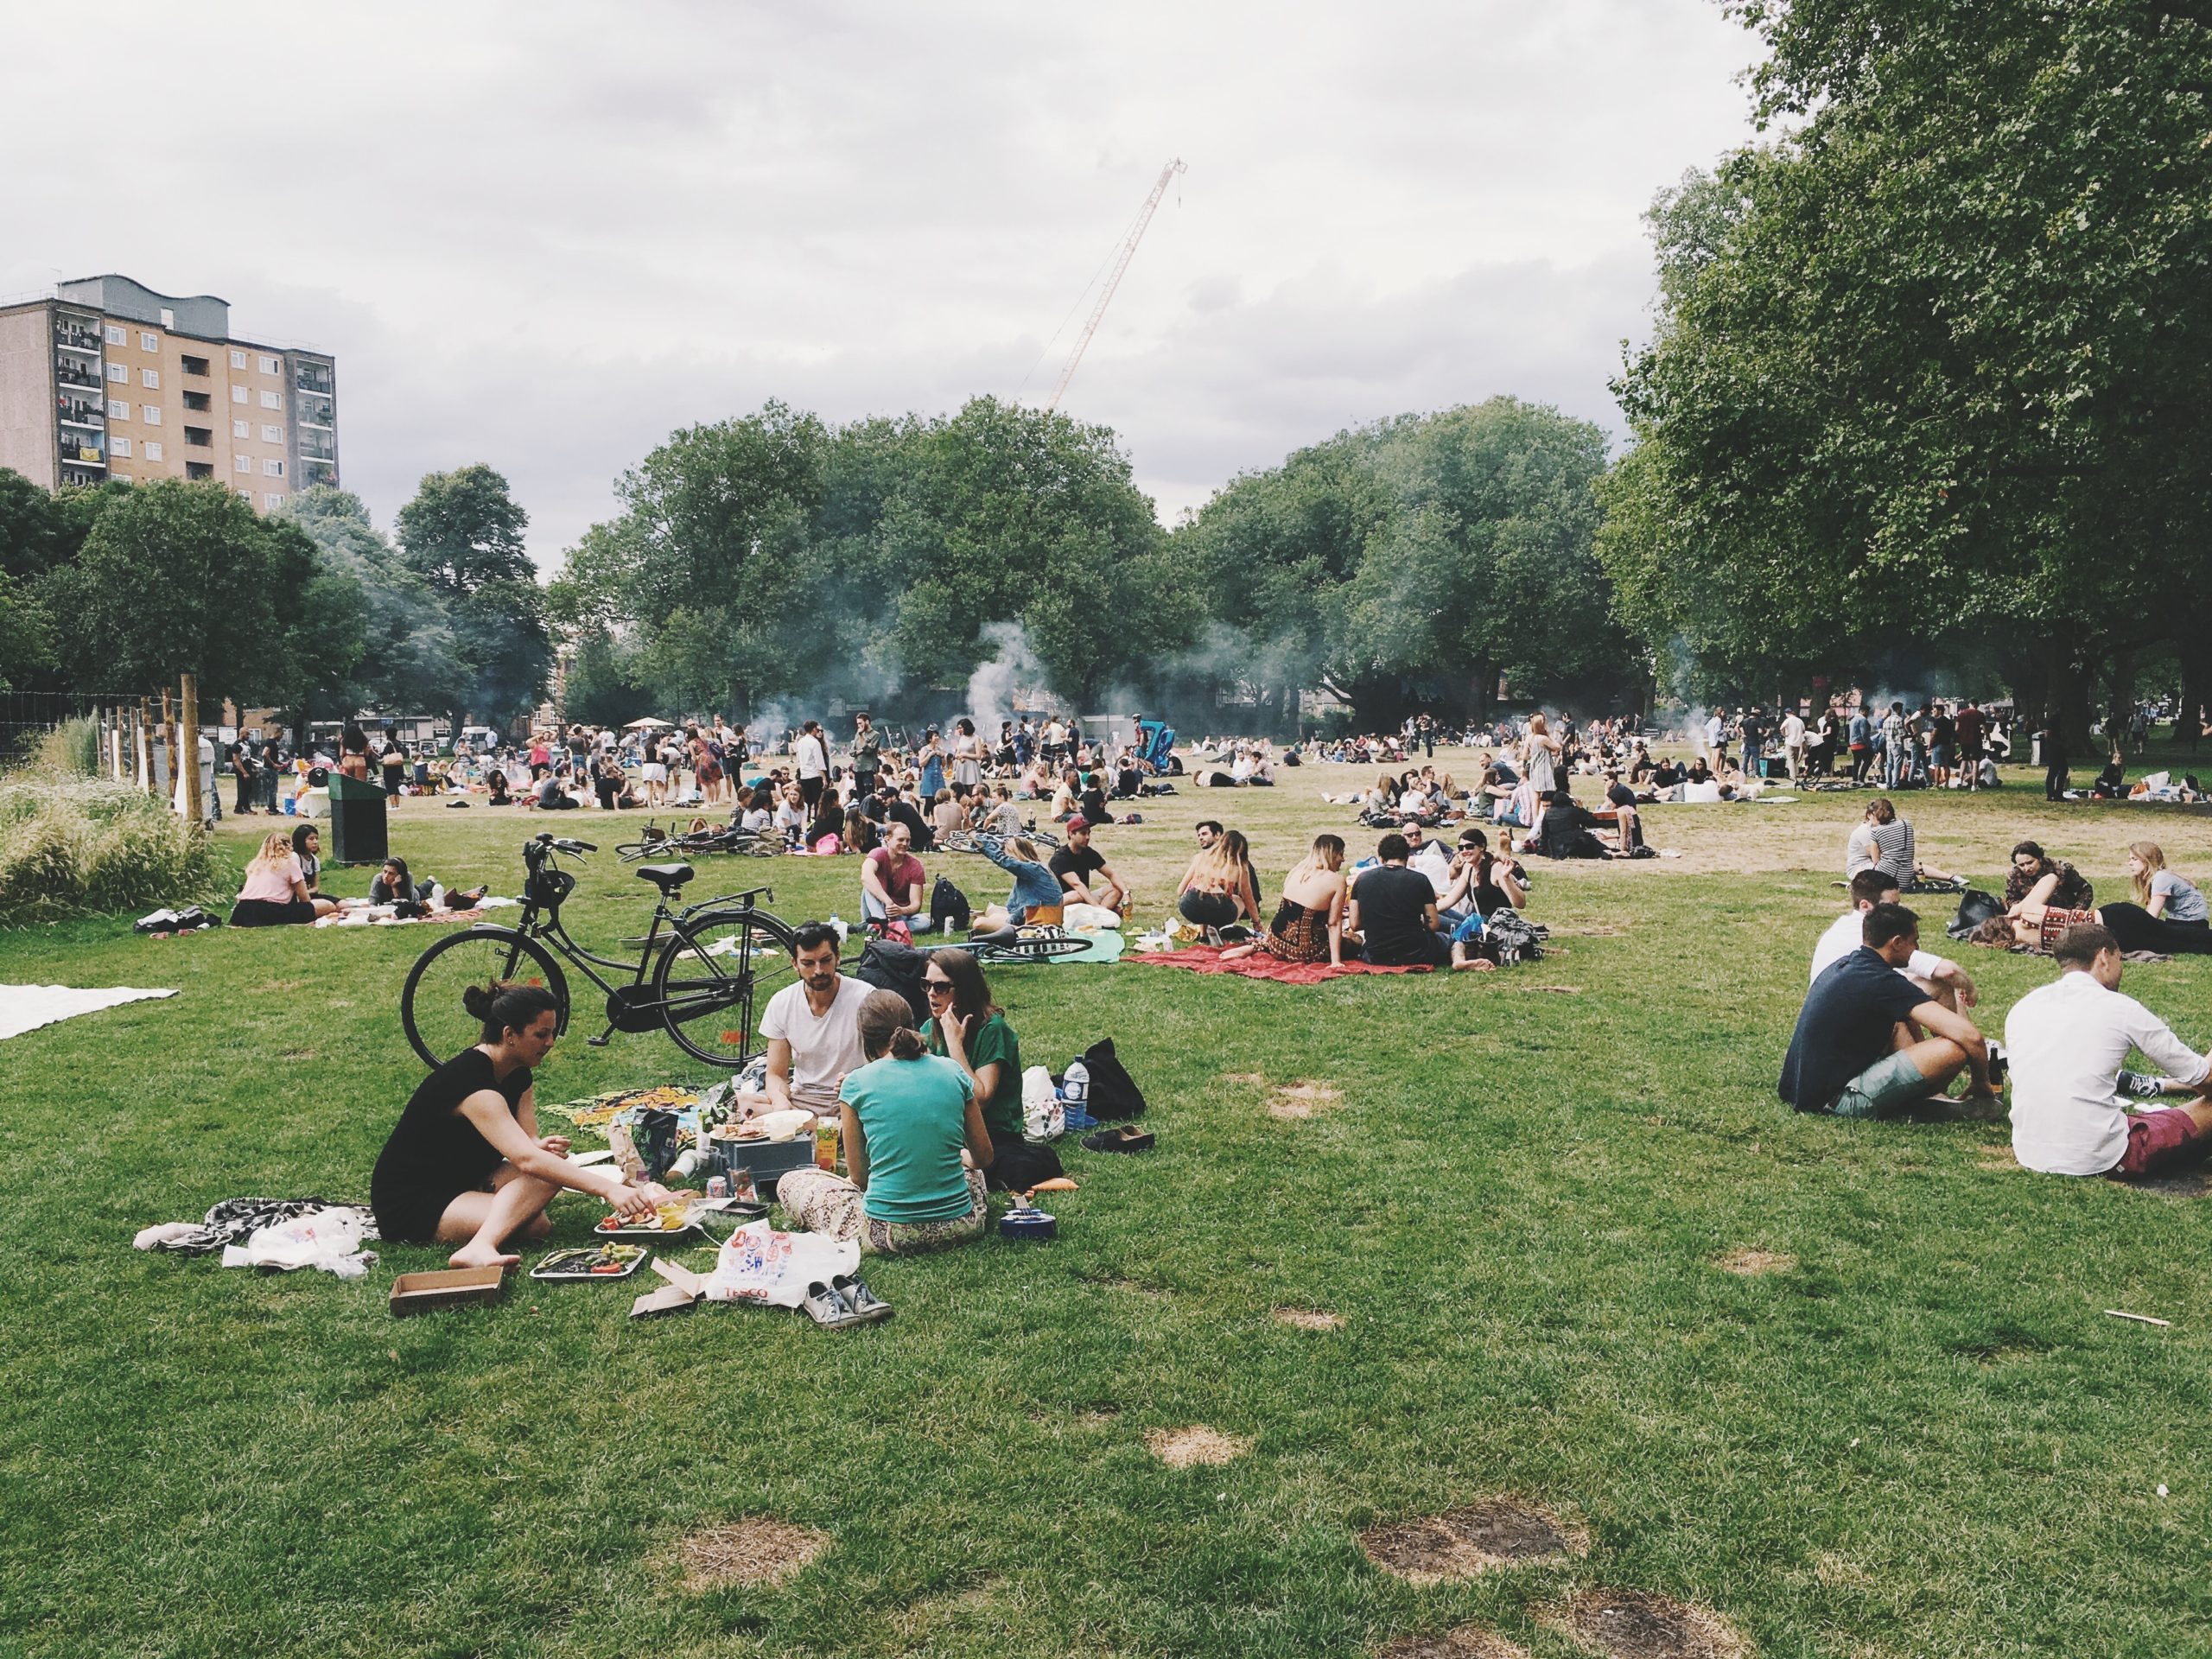 Featured Image of 5 ways to enjoy London for free(ish) this Summer.